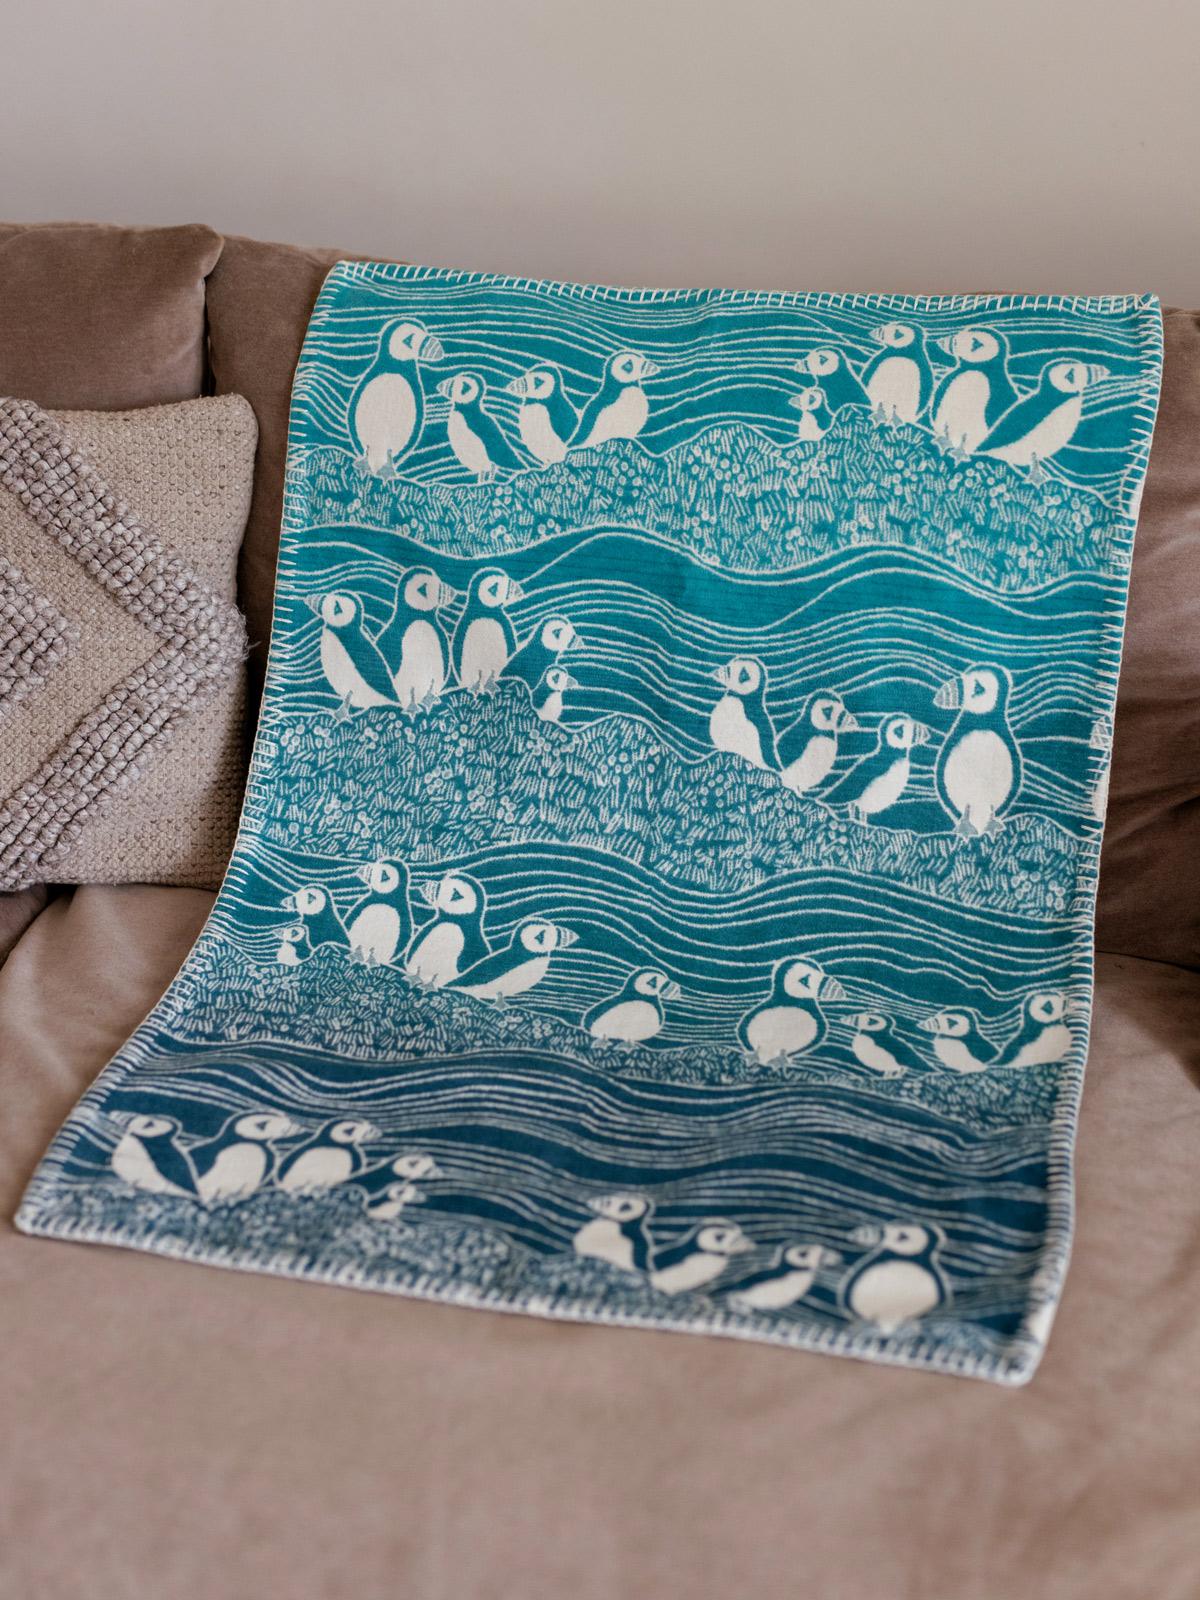 Puffins Bass Rock Brushed Cotton Baby Blanket